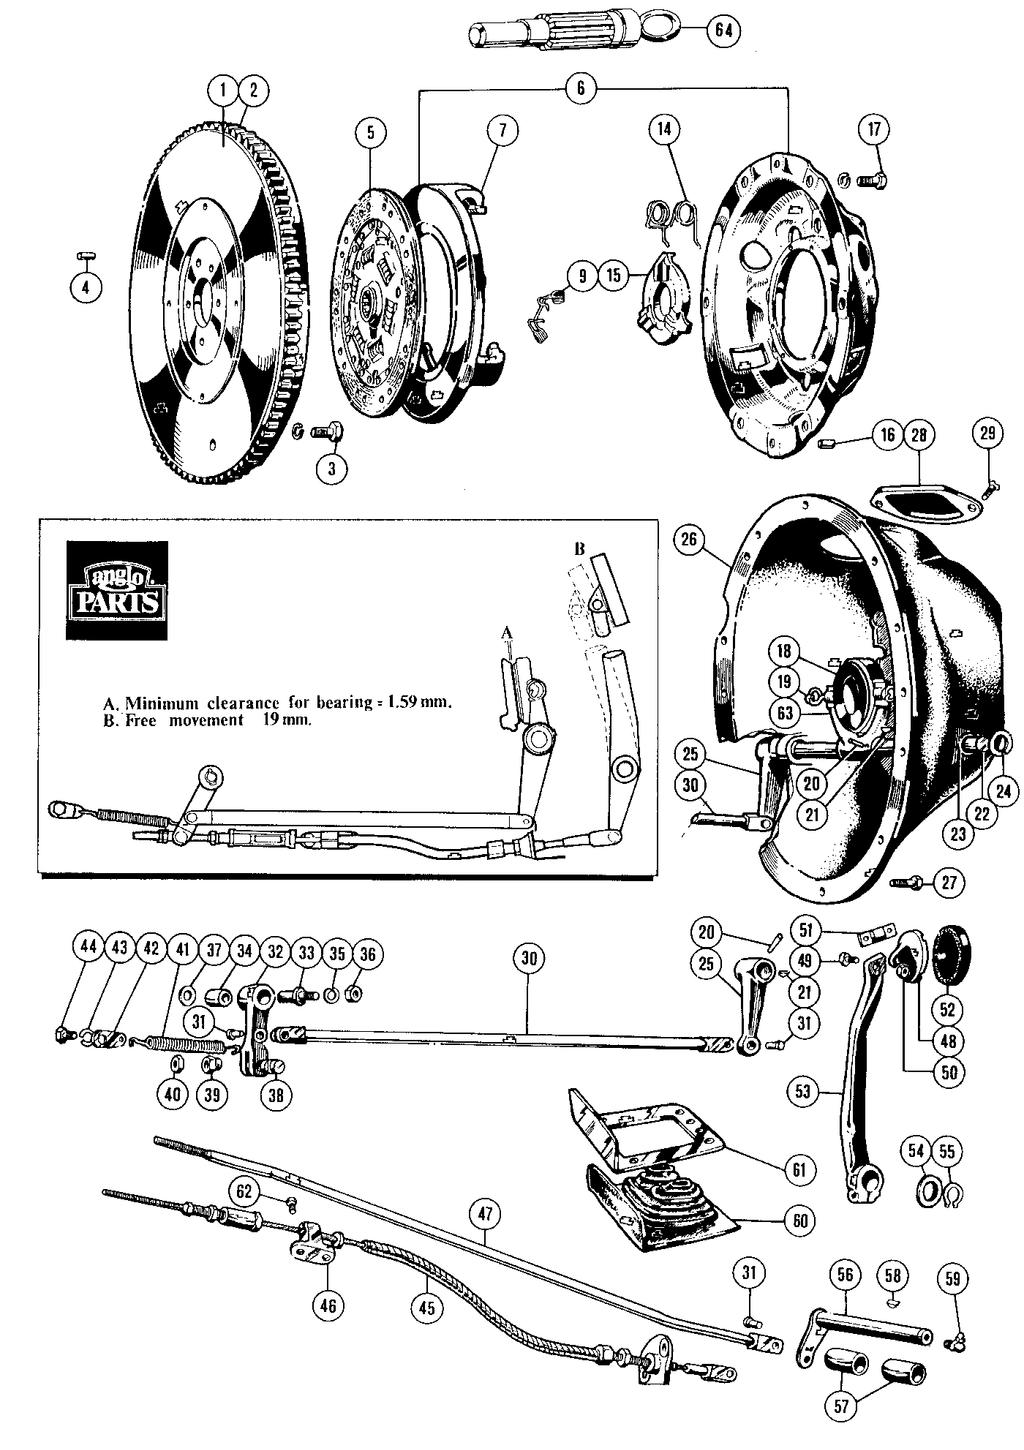 MGTD-TF 1949-1955 - Clutch covers | Webshop Anglo Parts - 1